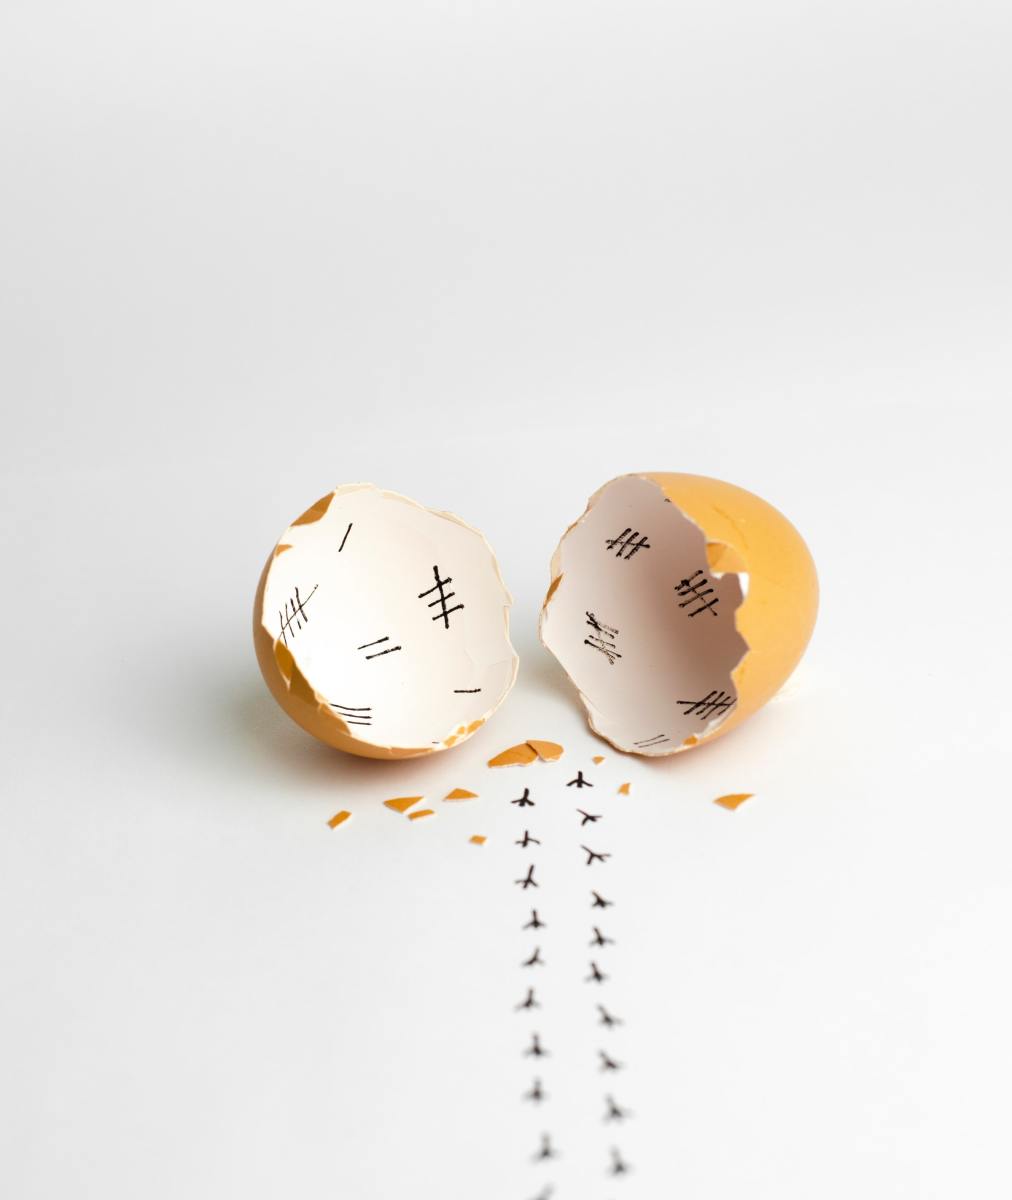 Cracked eggs have dual symbolism in dreams.